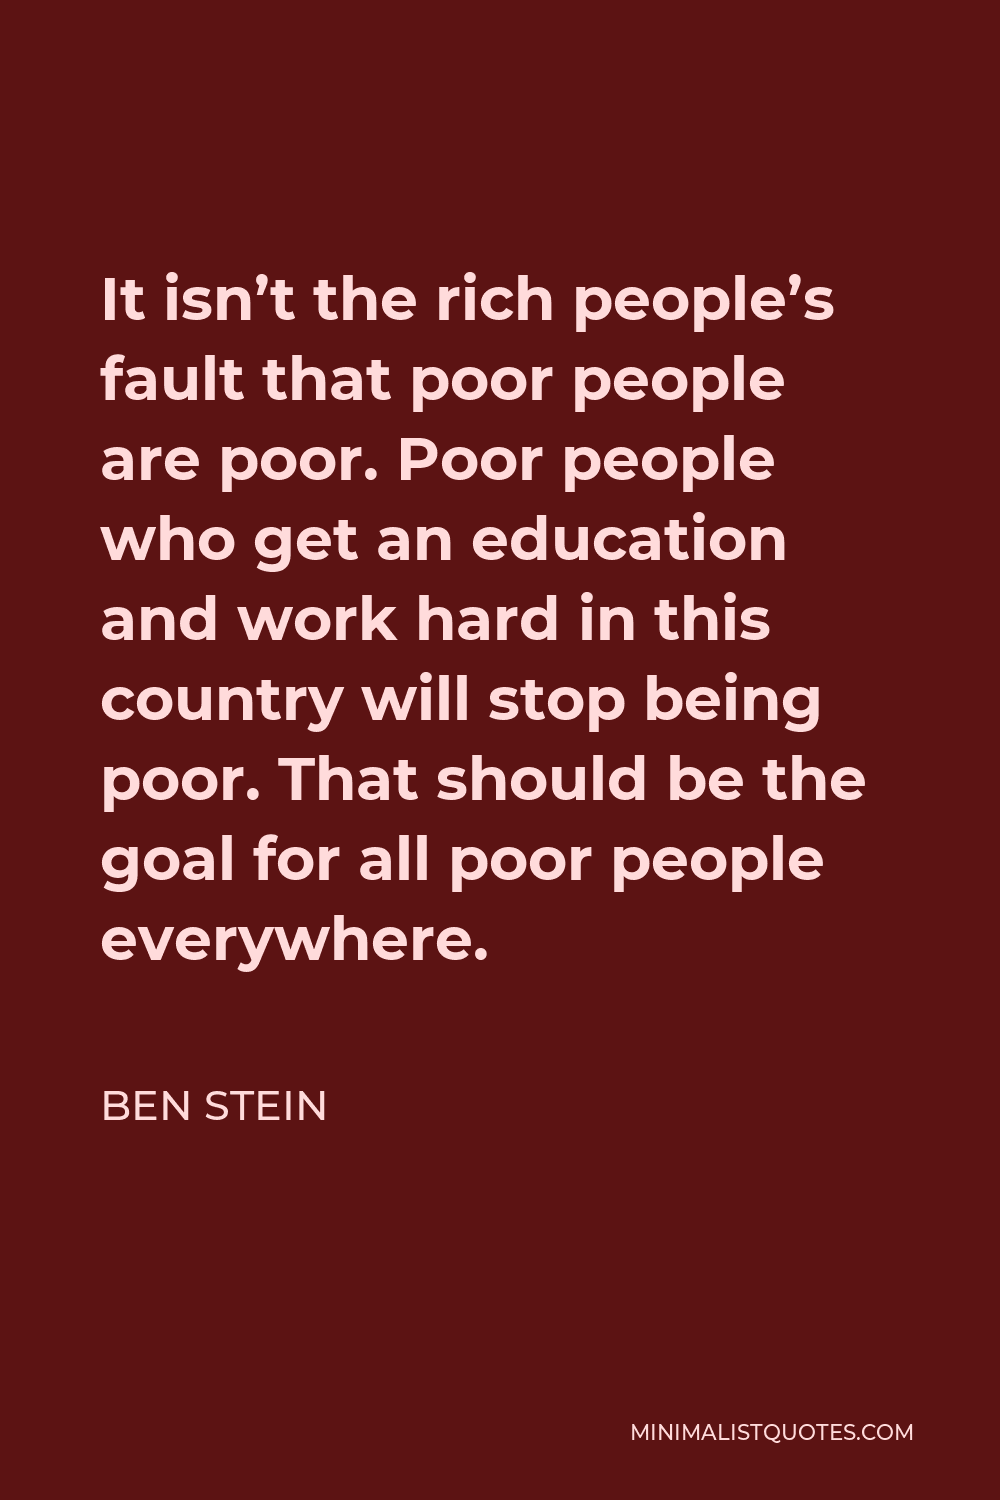 Ben Stein Quote - It isn’t the rich people’s fault that poor people are poor. Poor people who get an education and work hard in this country will stop being poor. That should be the goal for all poor people everywhere.